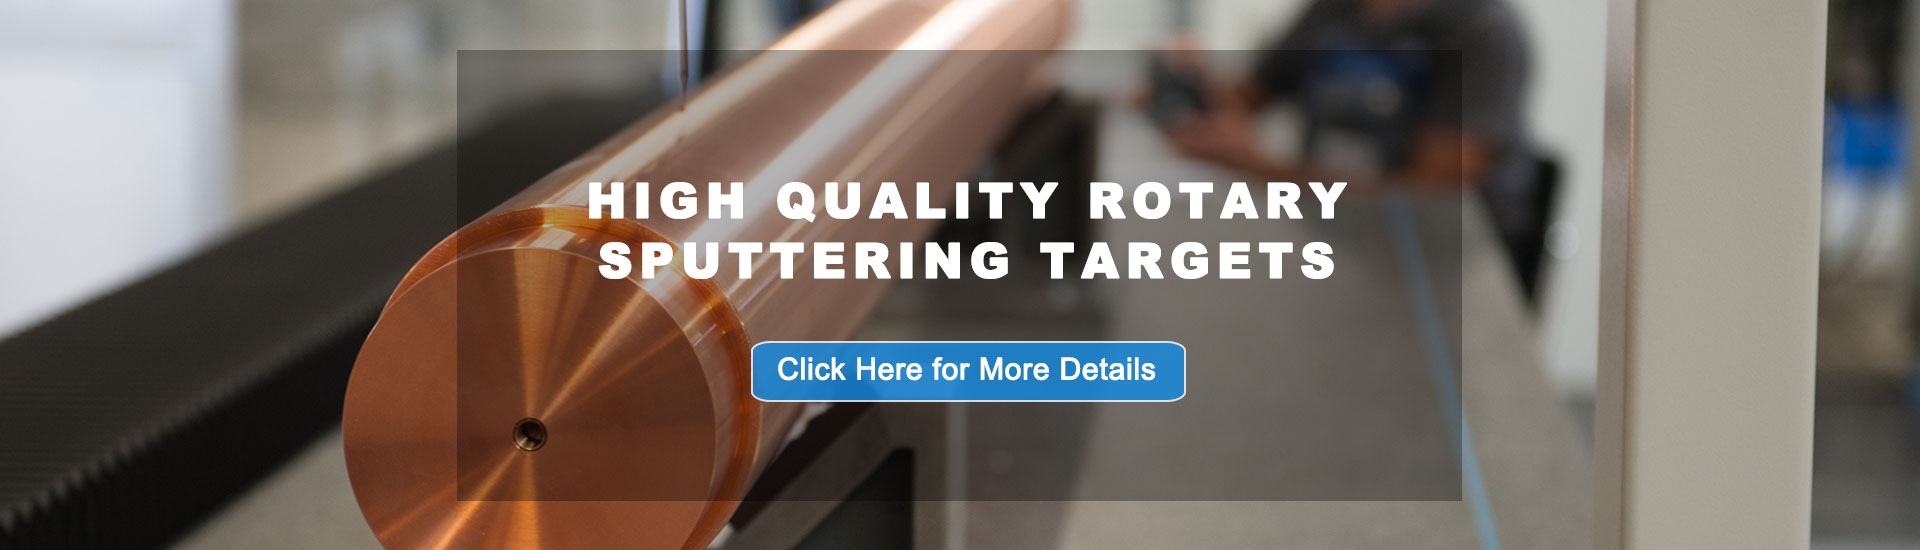 Over 10+ years experiences of Manufacturing High Quality Rotary Sputtering Targets ! AEM produce all kinds of Rotary Sputtering Targets with high purity and cutomized sizes accroding to customer's requirments.